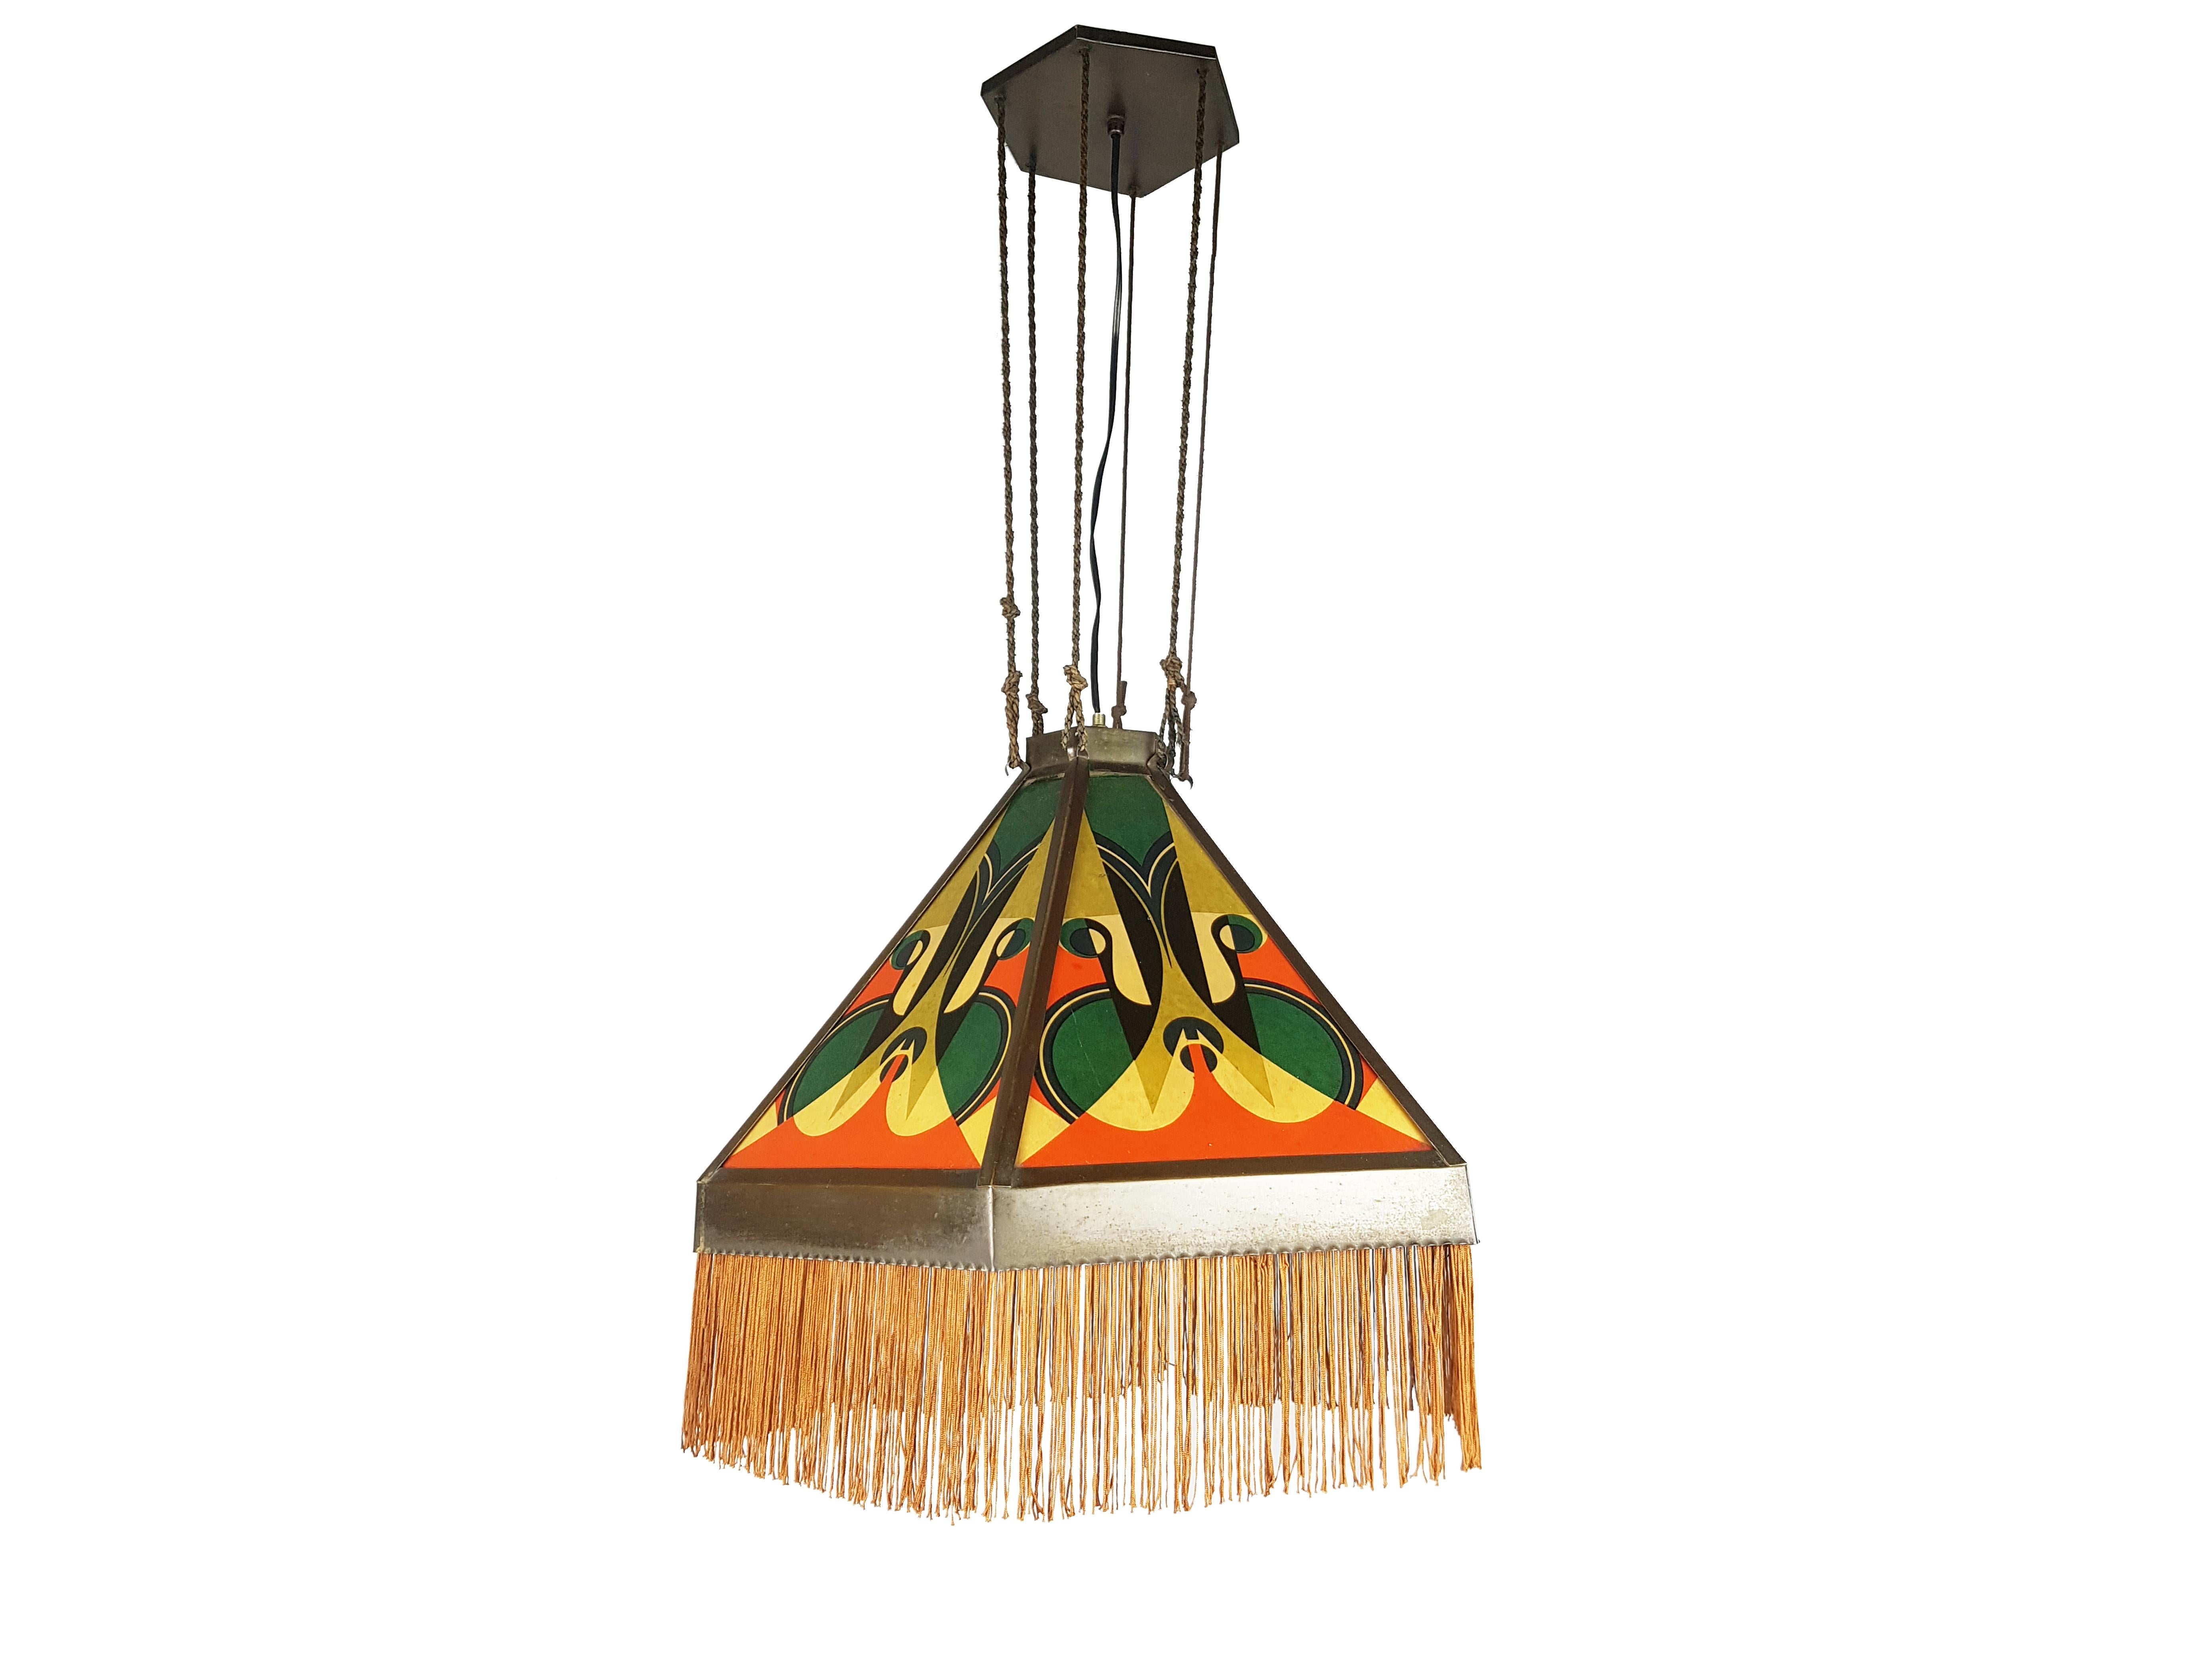 Copper & Printed Glass Art Deco Pendant Lamp Attributed to the Amsterdam School For Sale 3